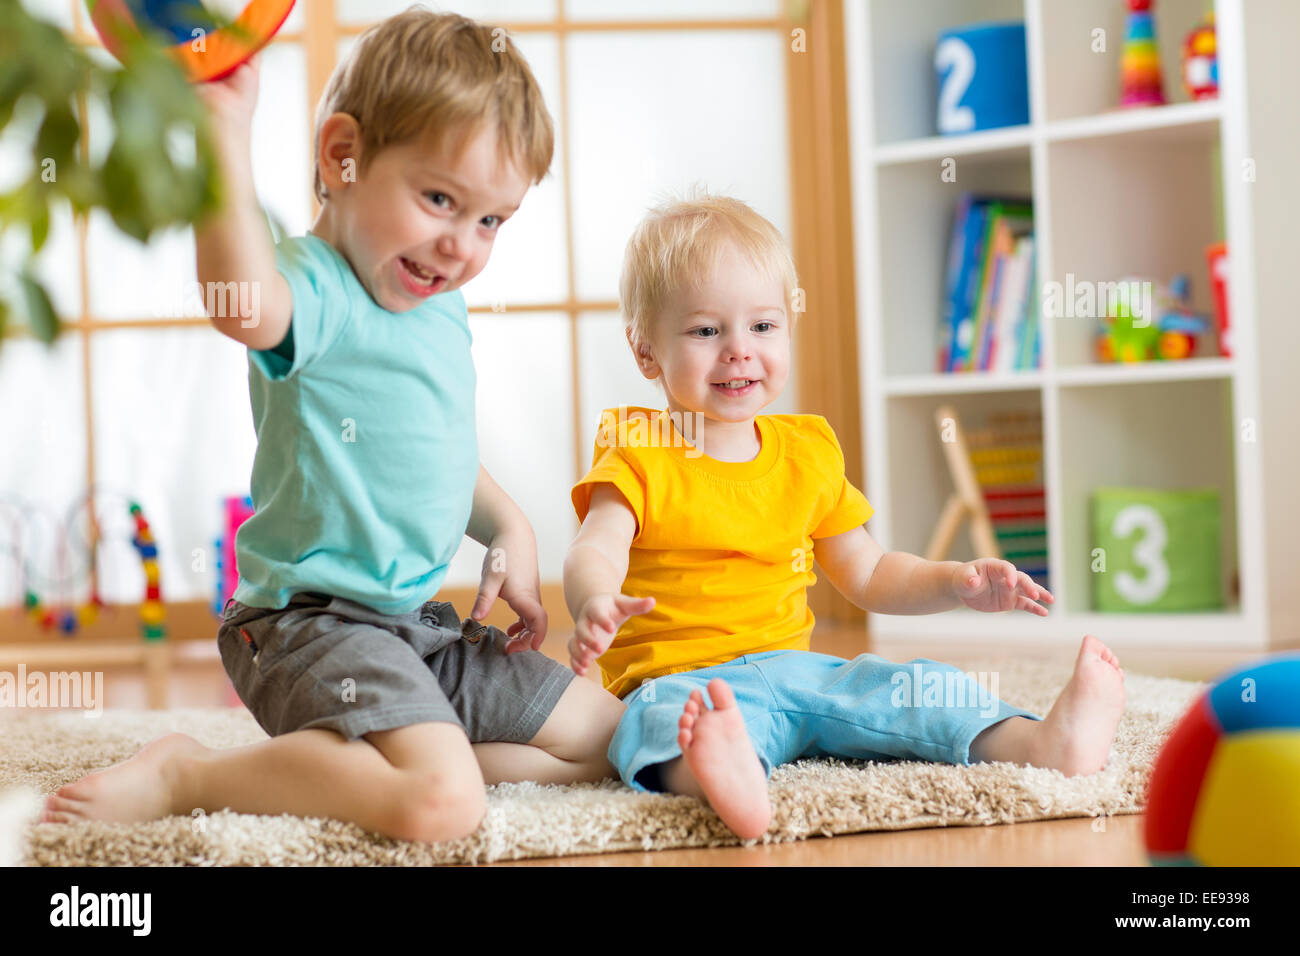 kids playing with ball in playroom Stock Photo